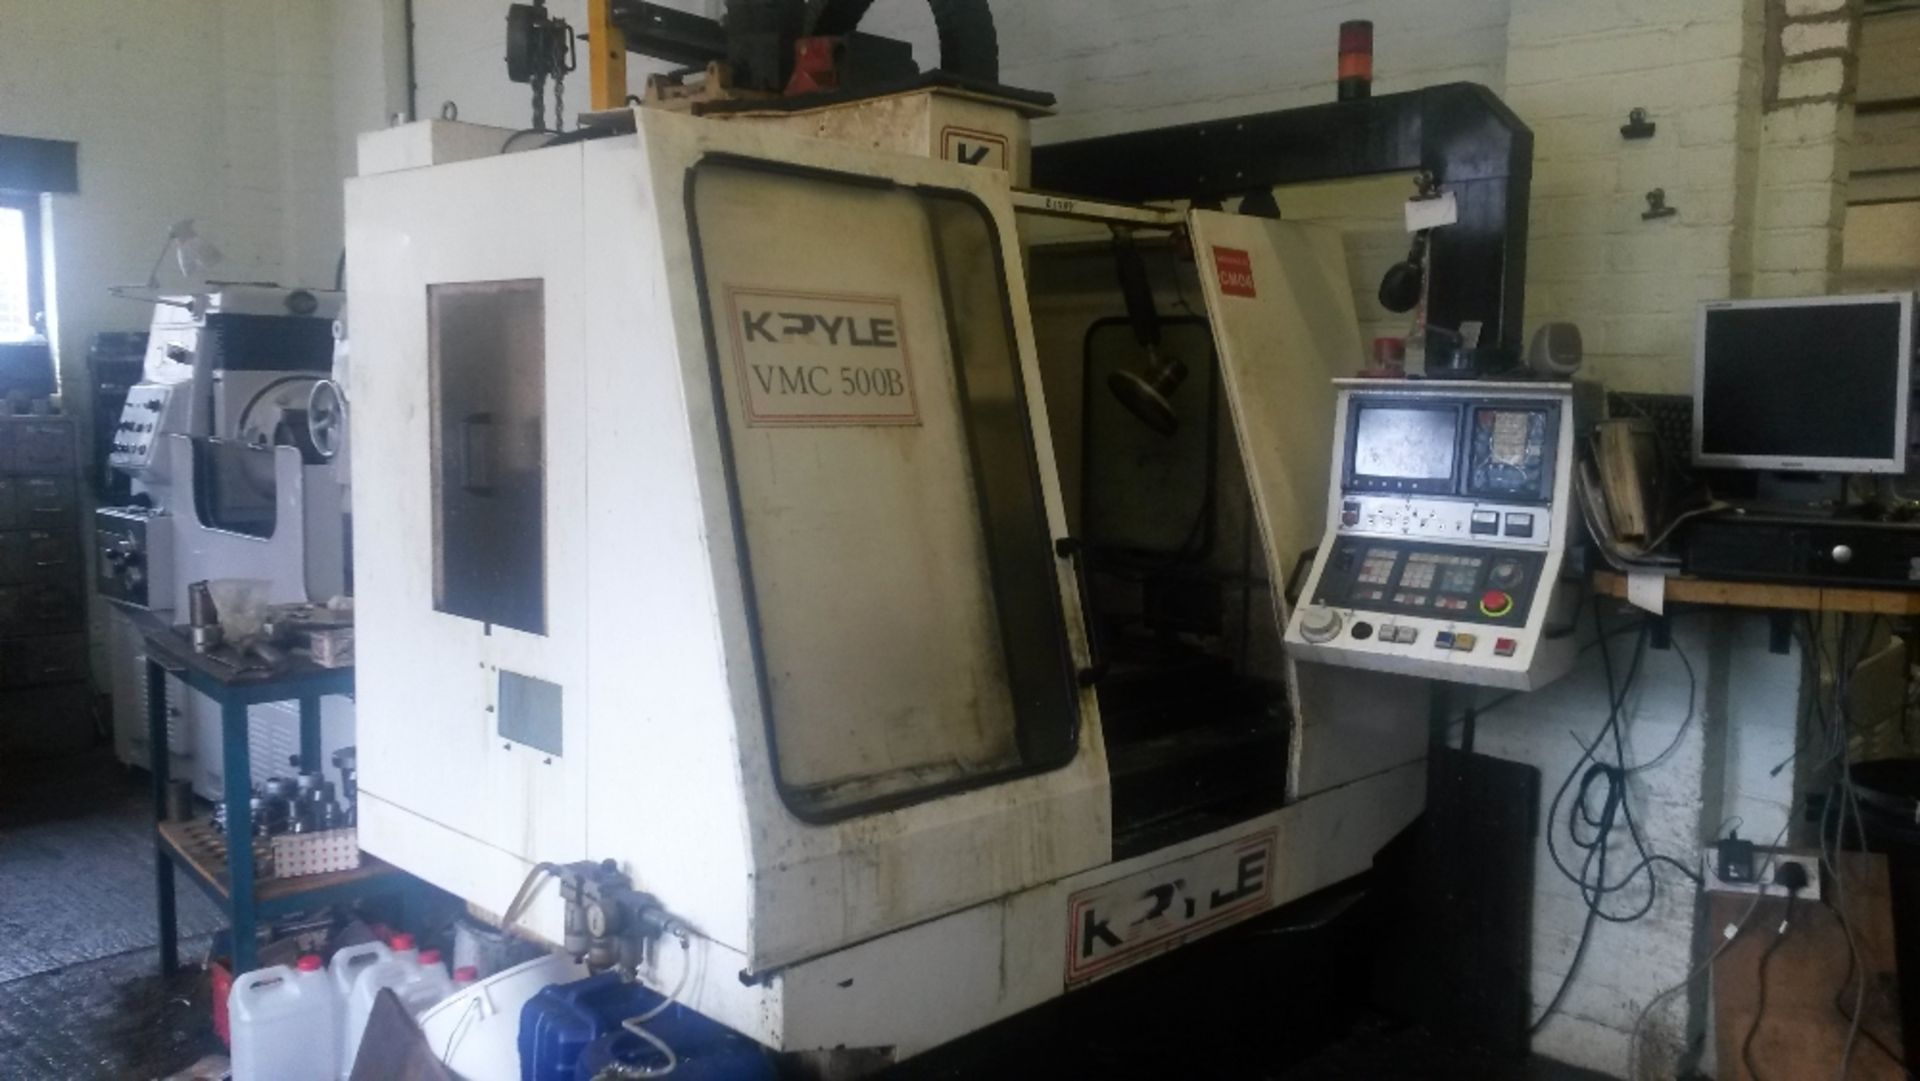 Kryle VMC500B CNC Milling Machine Machine Type :VERTICAL
Control :Fanuc
Number of Axes :3
X Axis